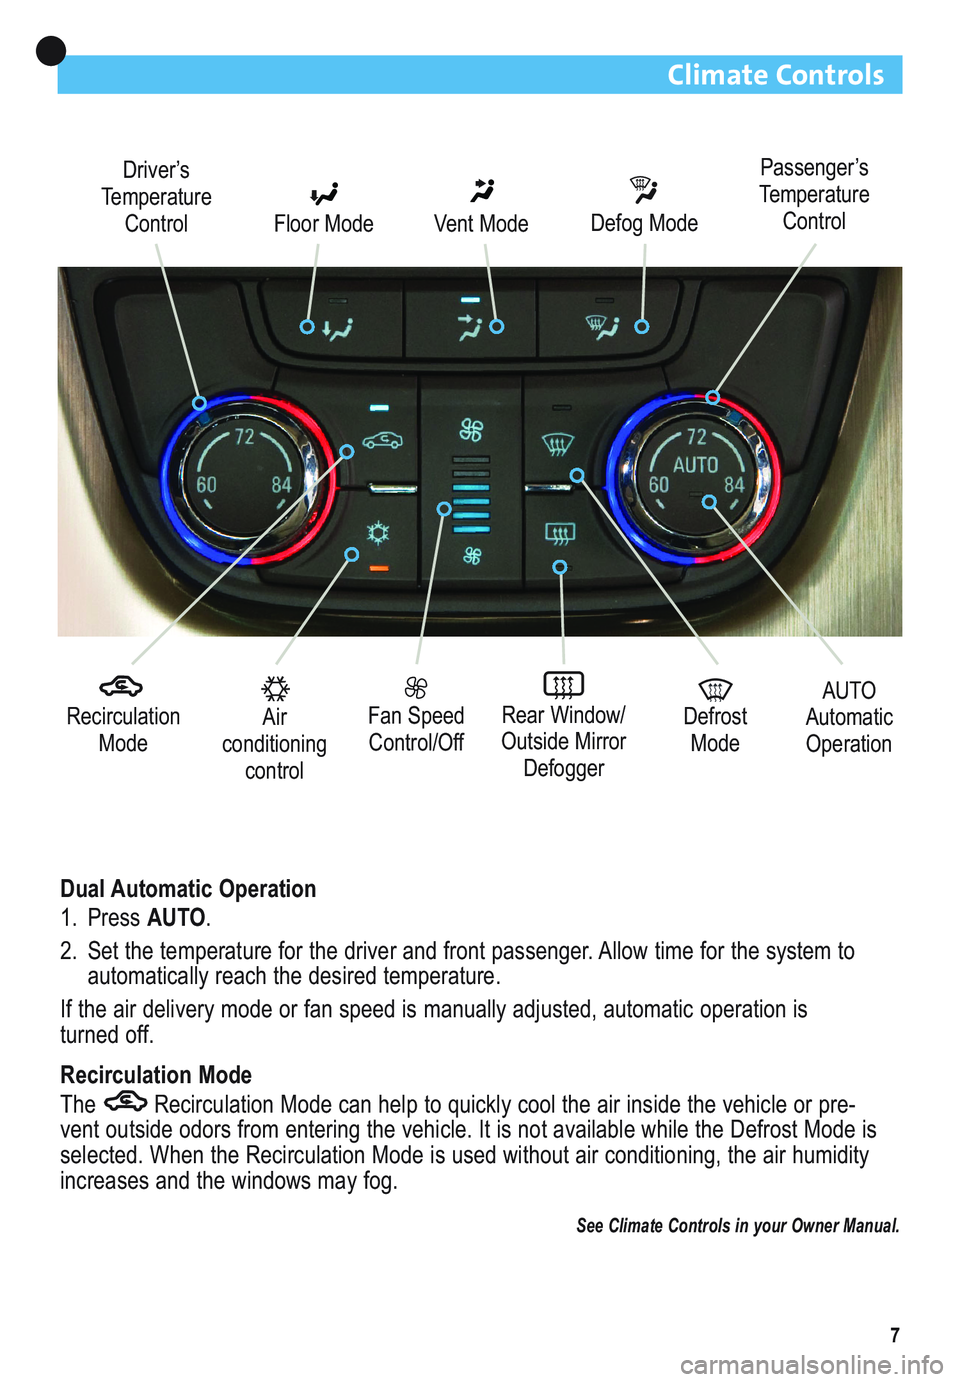 BUICK ENCLAVE 2011  Get To Know Guide 7
Climate Controls
Recirculation
Mode
Driver’s
Temperature
Control Floor Mode
Vent ModeDefog Mode
Fan Speed
Control/OffRear Window/
Outside Mirror
DefoggerAir
conditioning
control
AUTO
Automatic
Ope